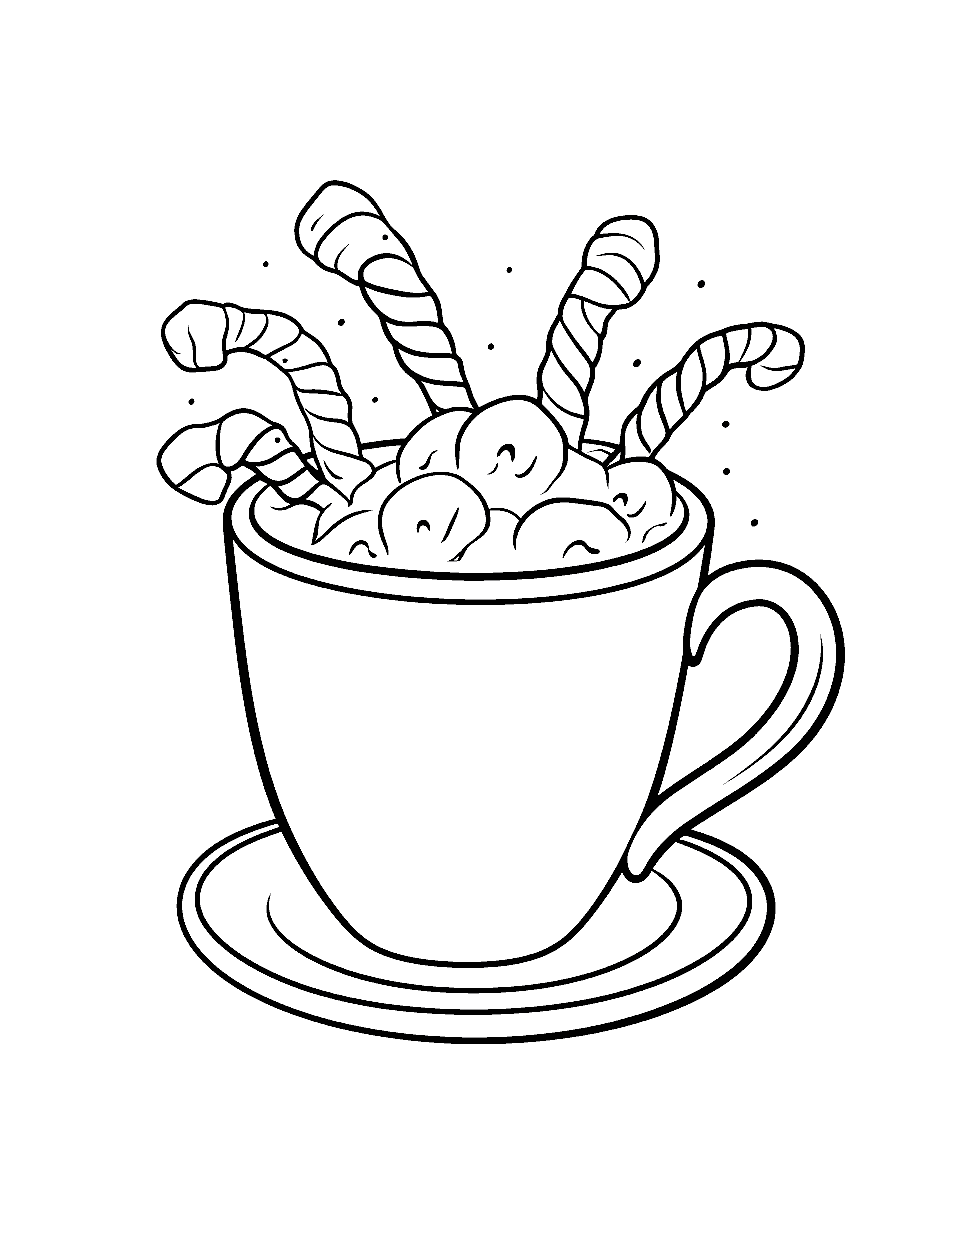 Cup of Cocoa Christmas Coloring Page - A steaming cup of hot cocoa with marshmallows, perfect for a chilly winter day.